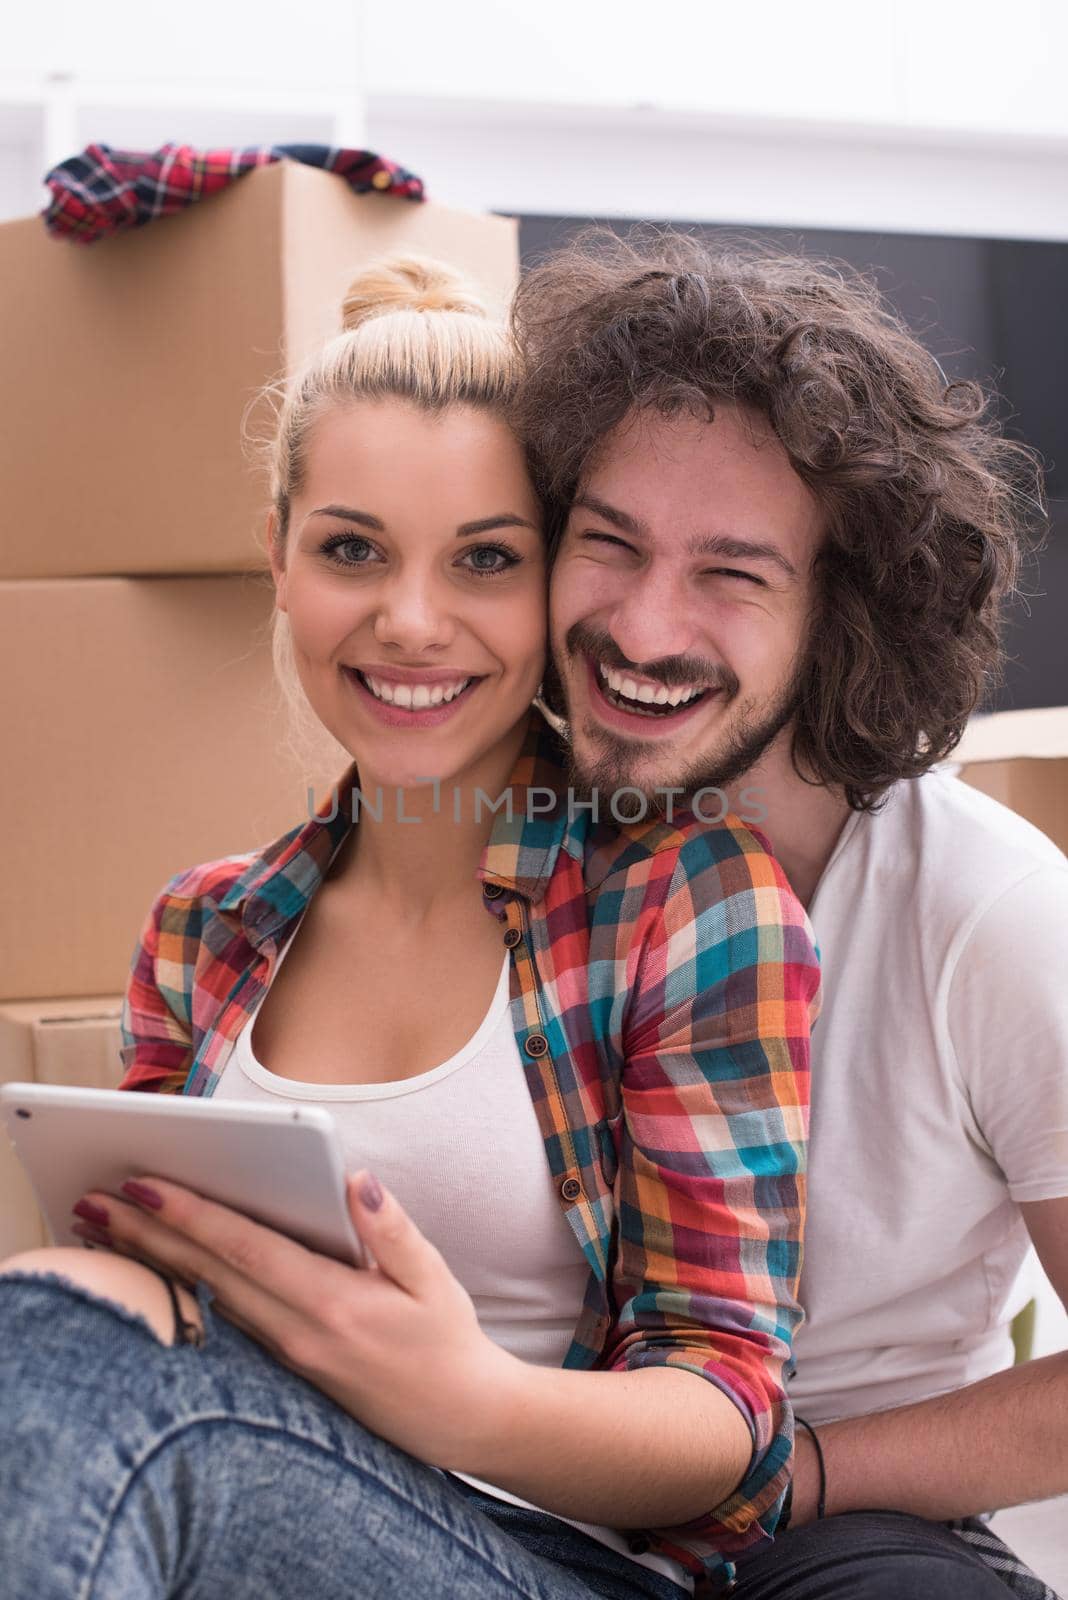 Relaxing in new house. Cheerful young couple sitting on the floor while cardboard boxes laying all around them